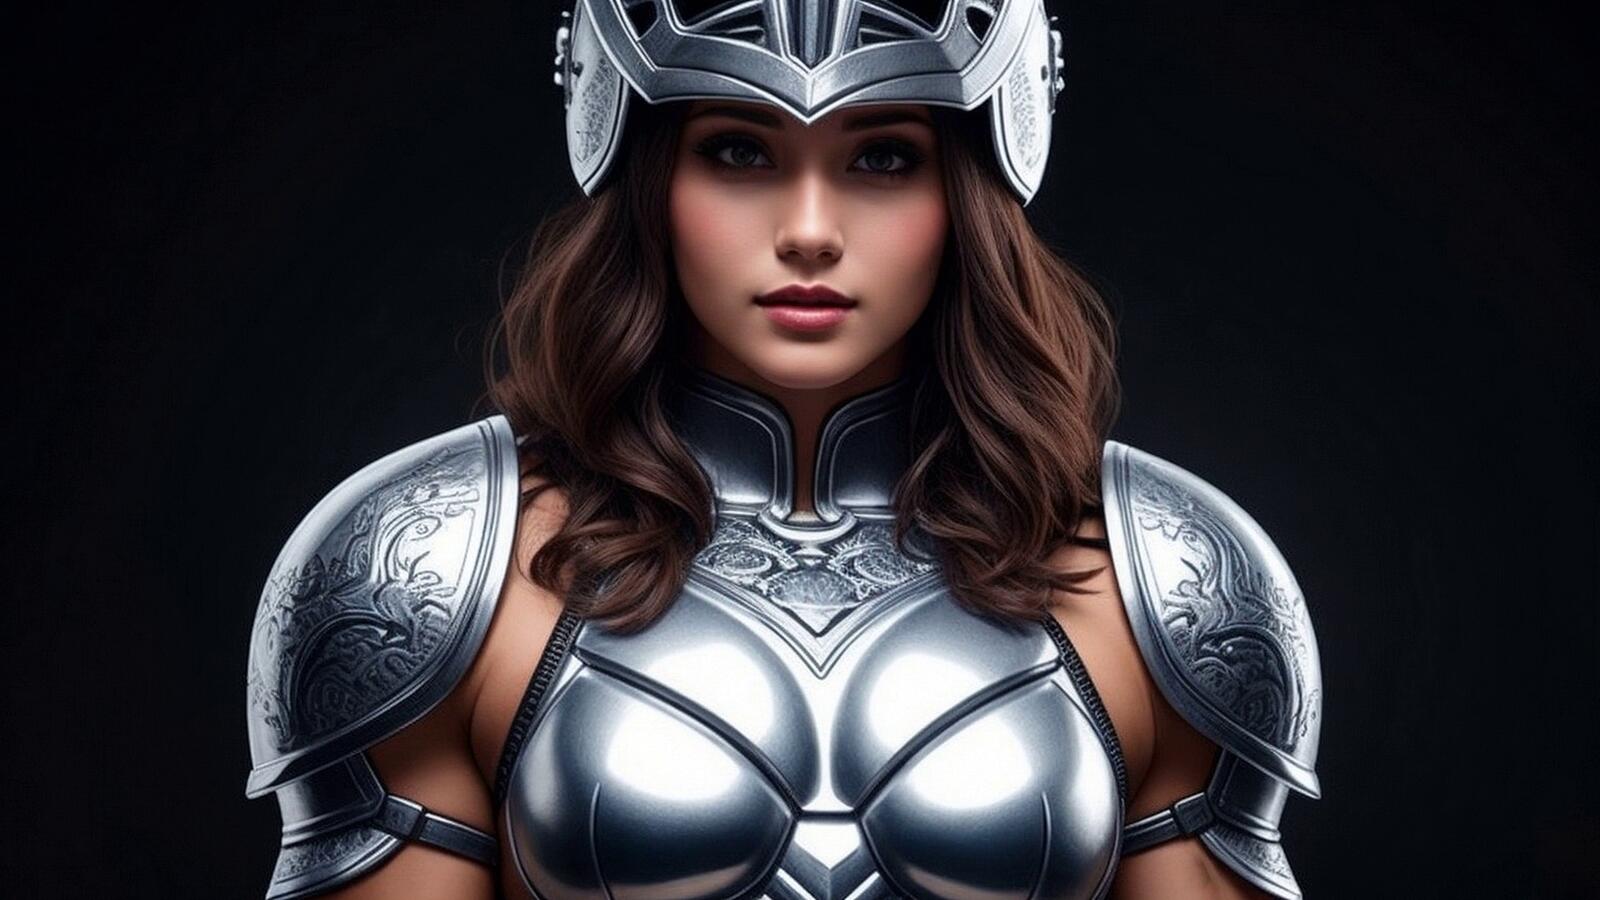 Free photo Girl warrior in silver armor on black background